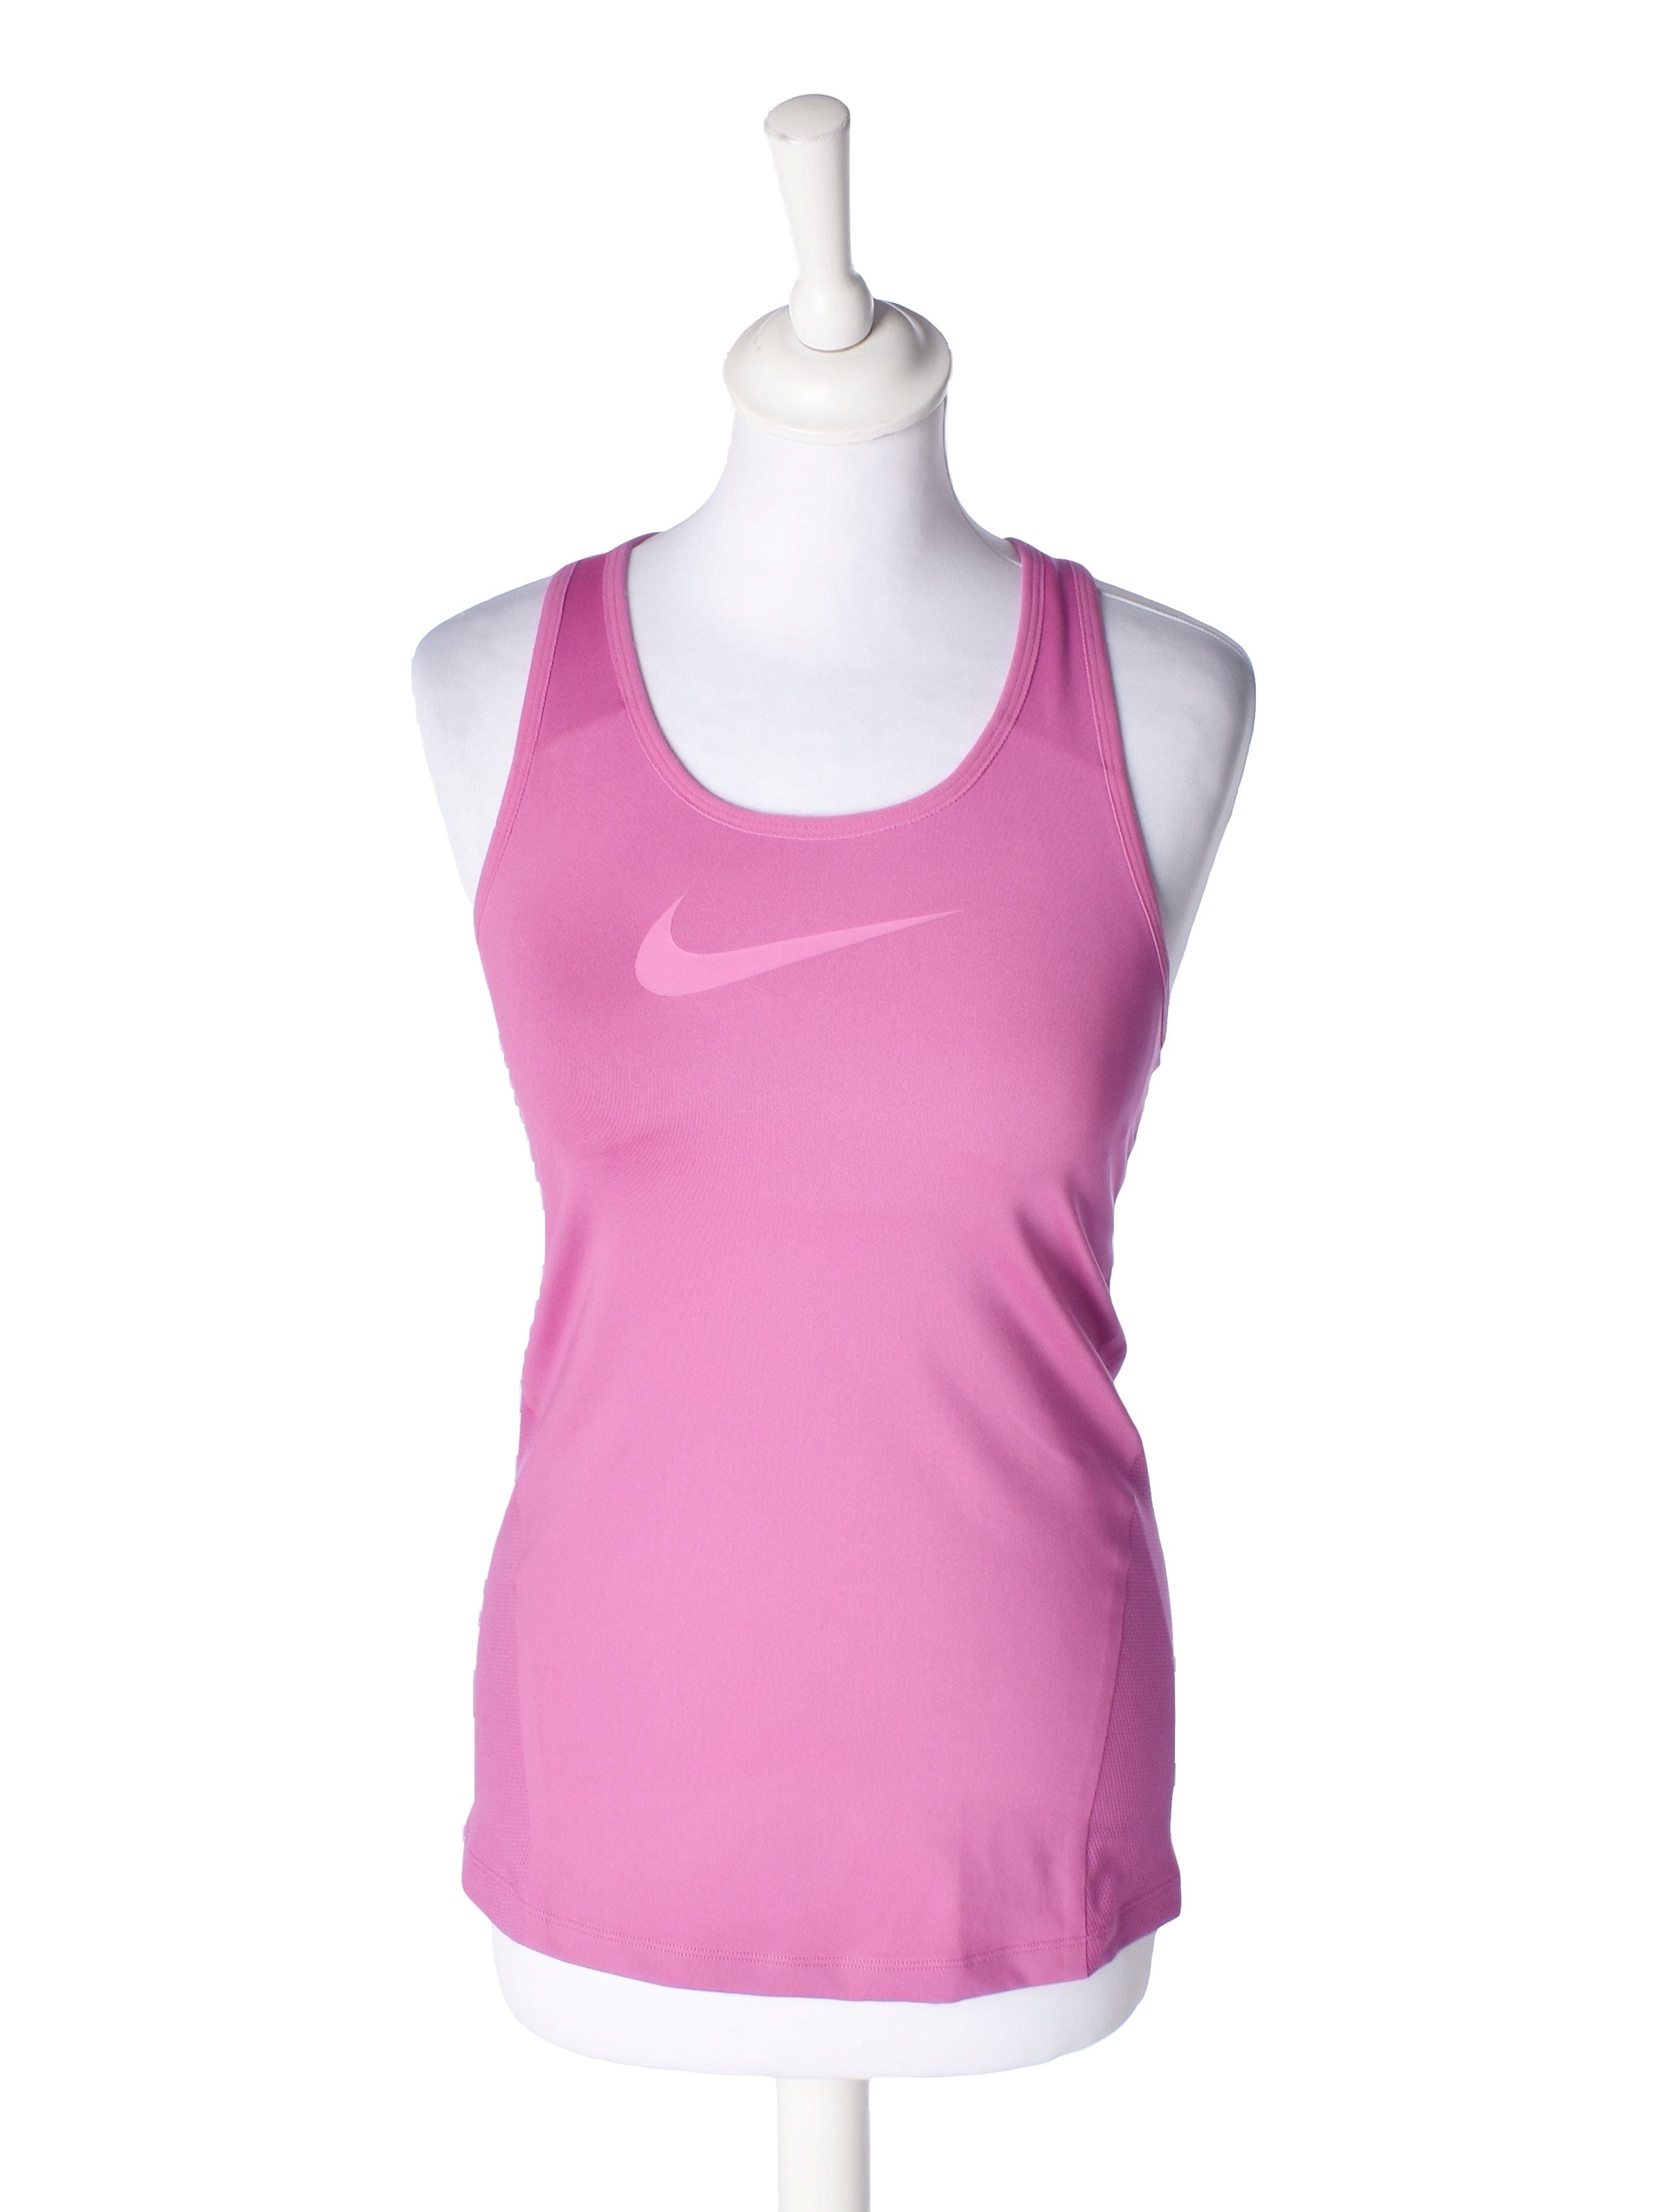 Secondhand - Nike - - Top - S / Pink